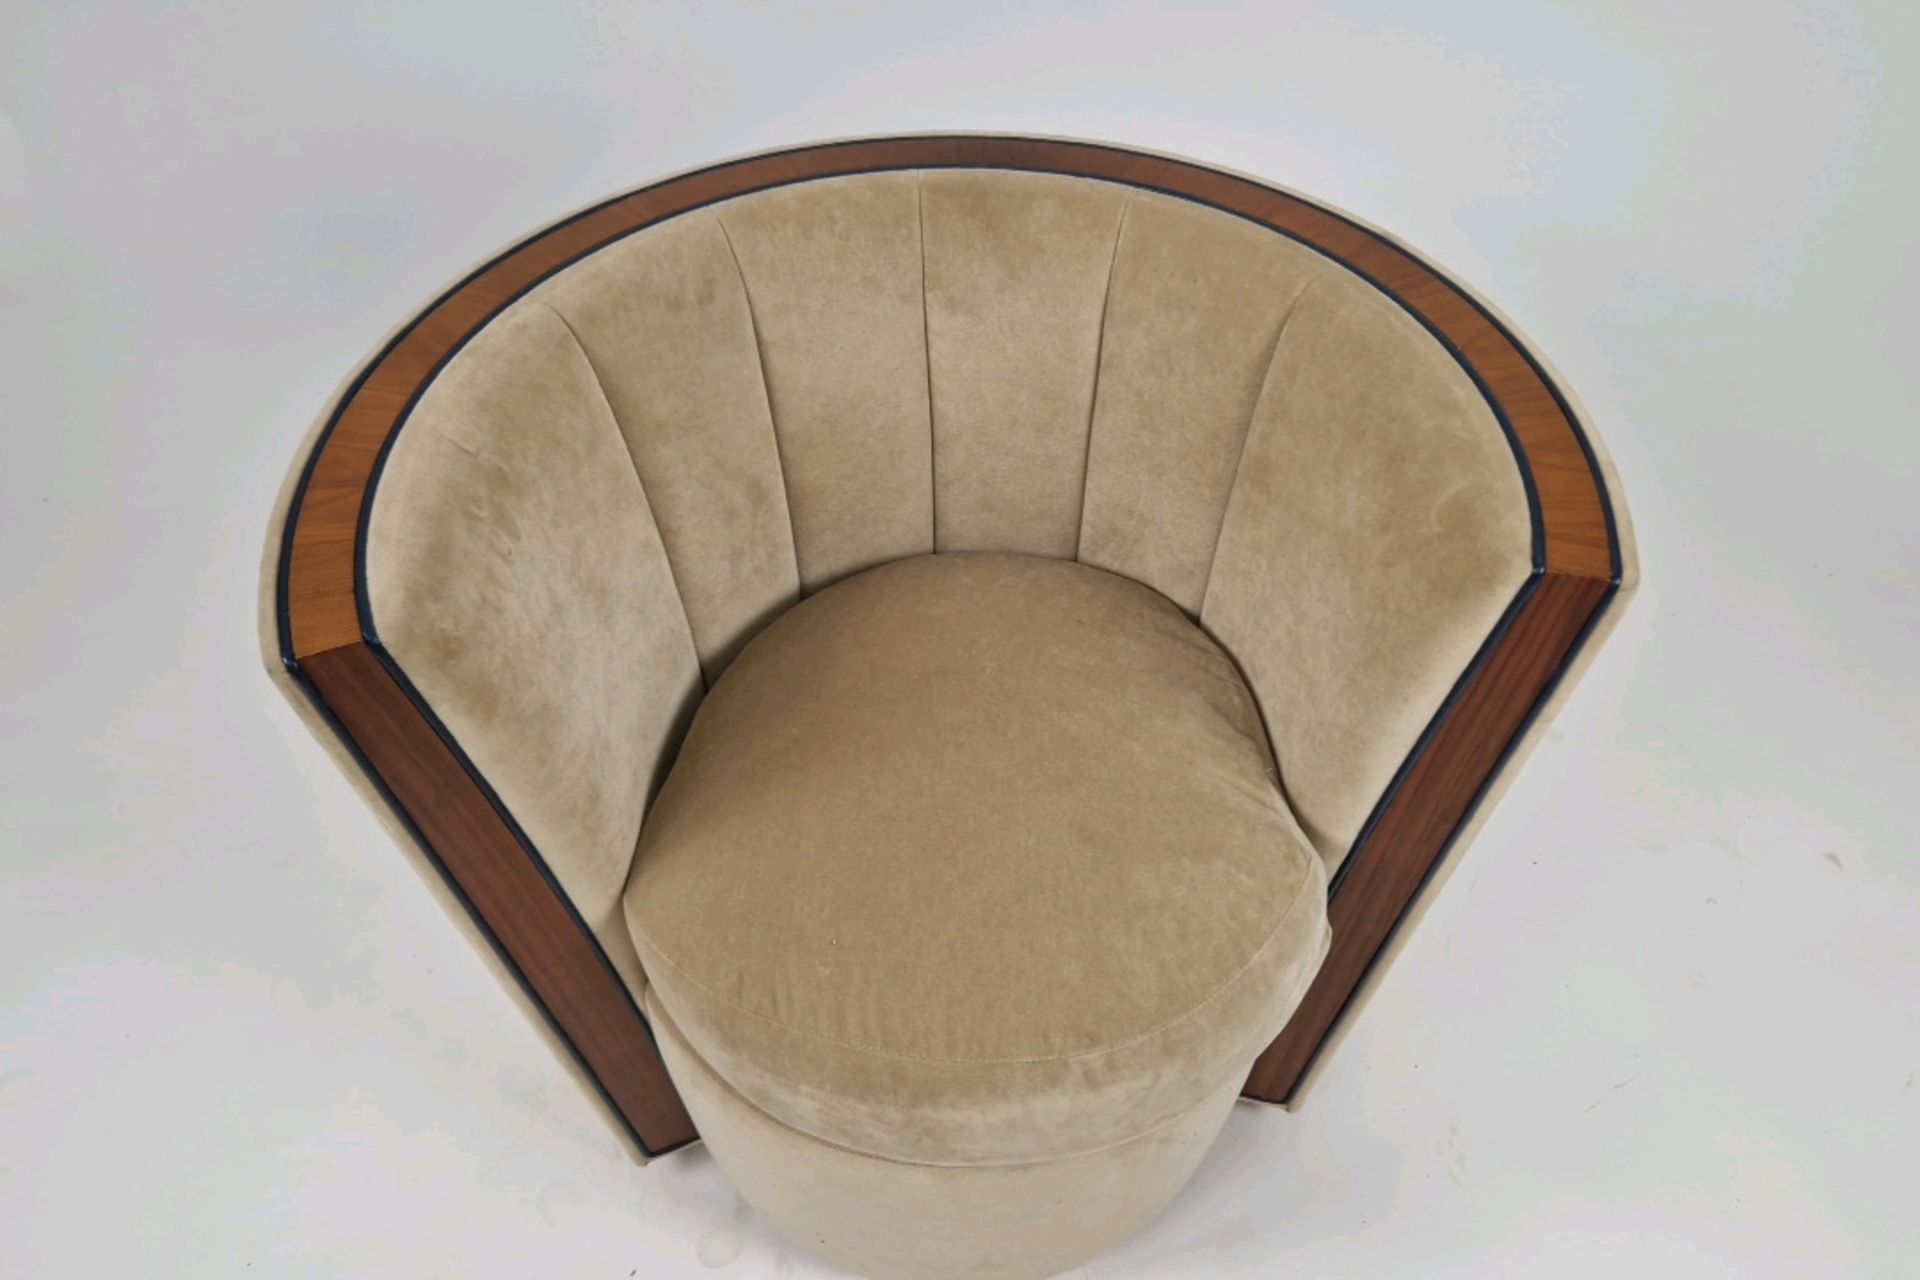 Bespoke David Linley Tub Chair Made for Claridge's Suites - Image 4 of 6